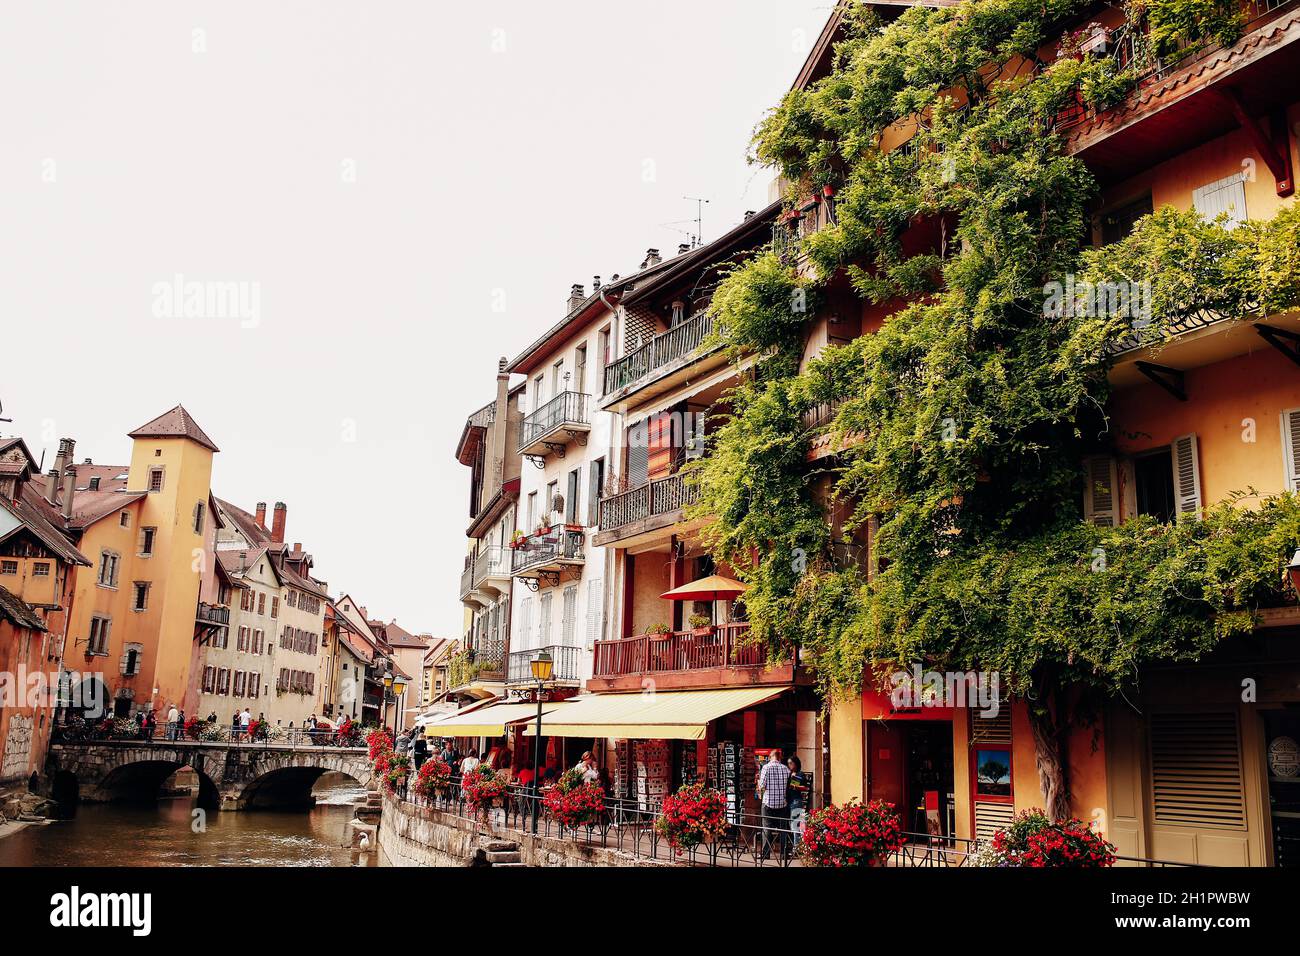 Annecy city water channel, red flowers, old buildings, bridge, green balconies. High quality photo Stock Photo